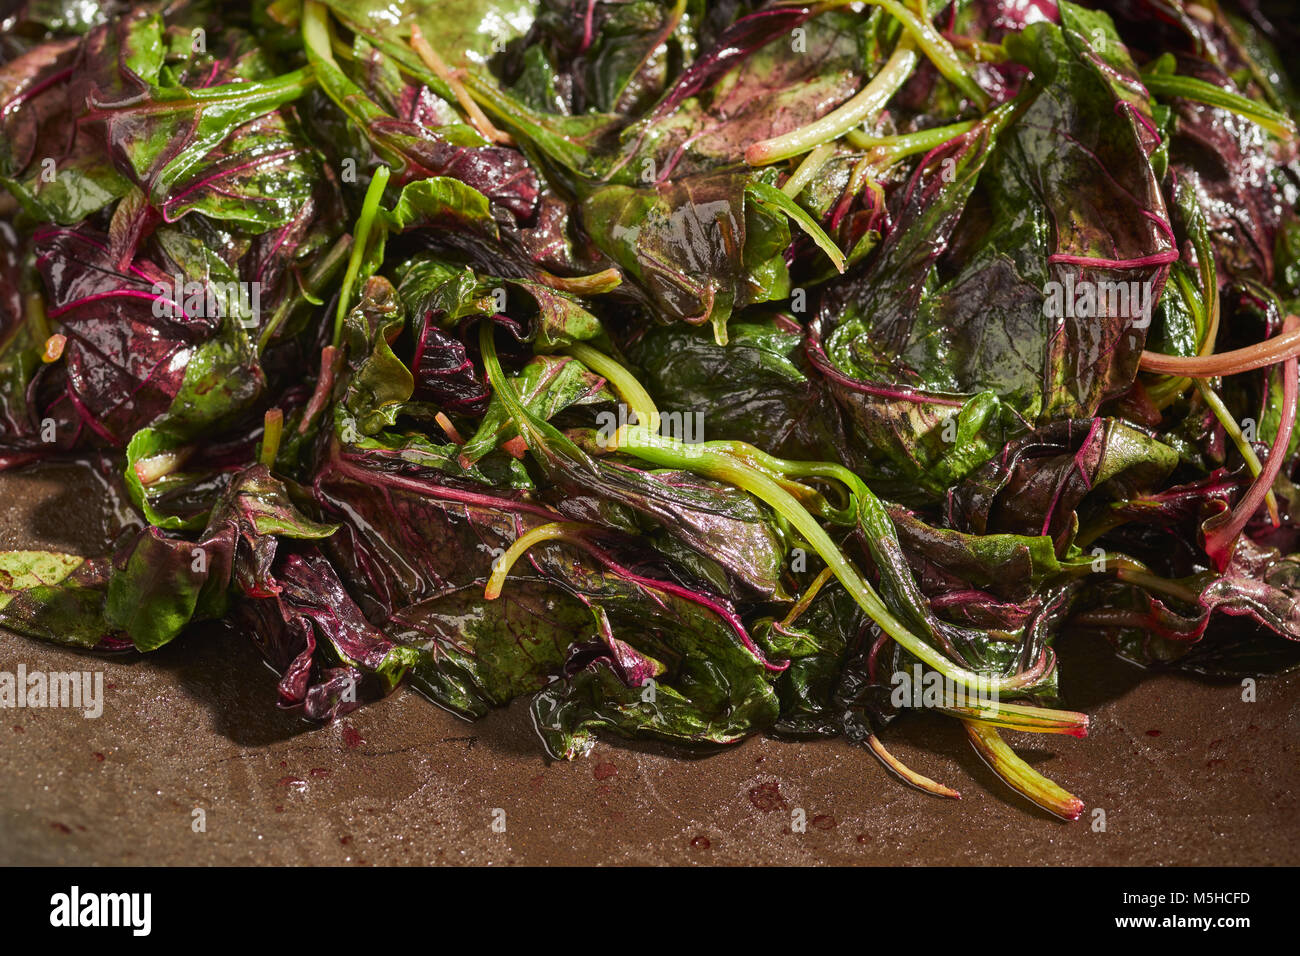 Red Amaranth, a type of spinach popular in Asian cuisines, cooked in a wok Stock Photo